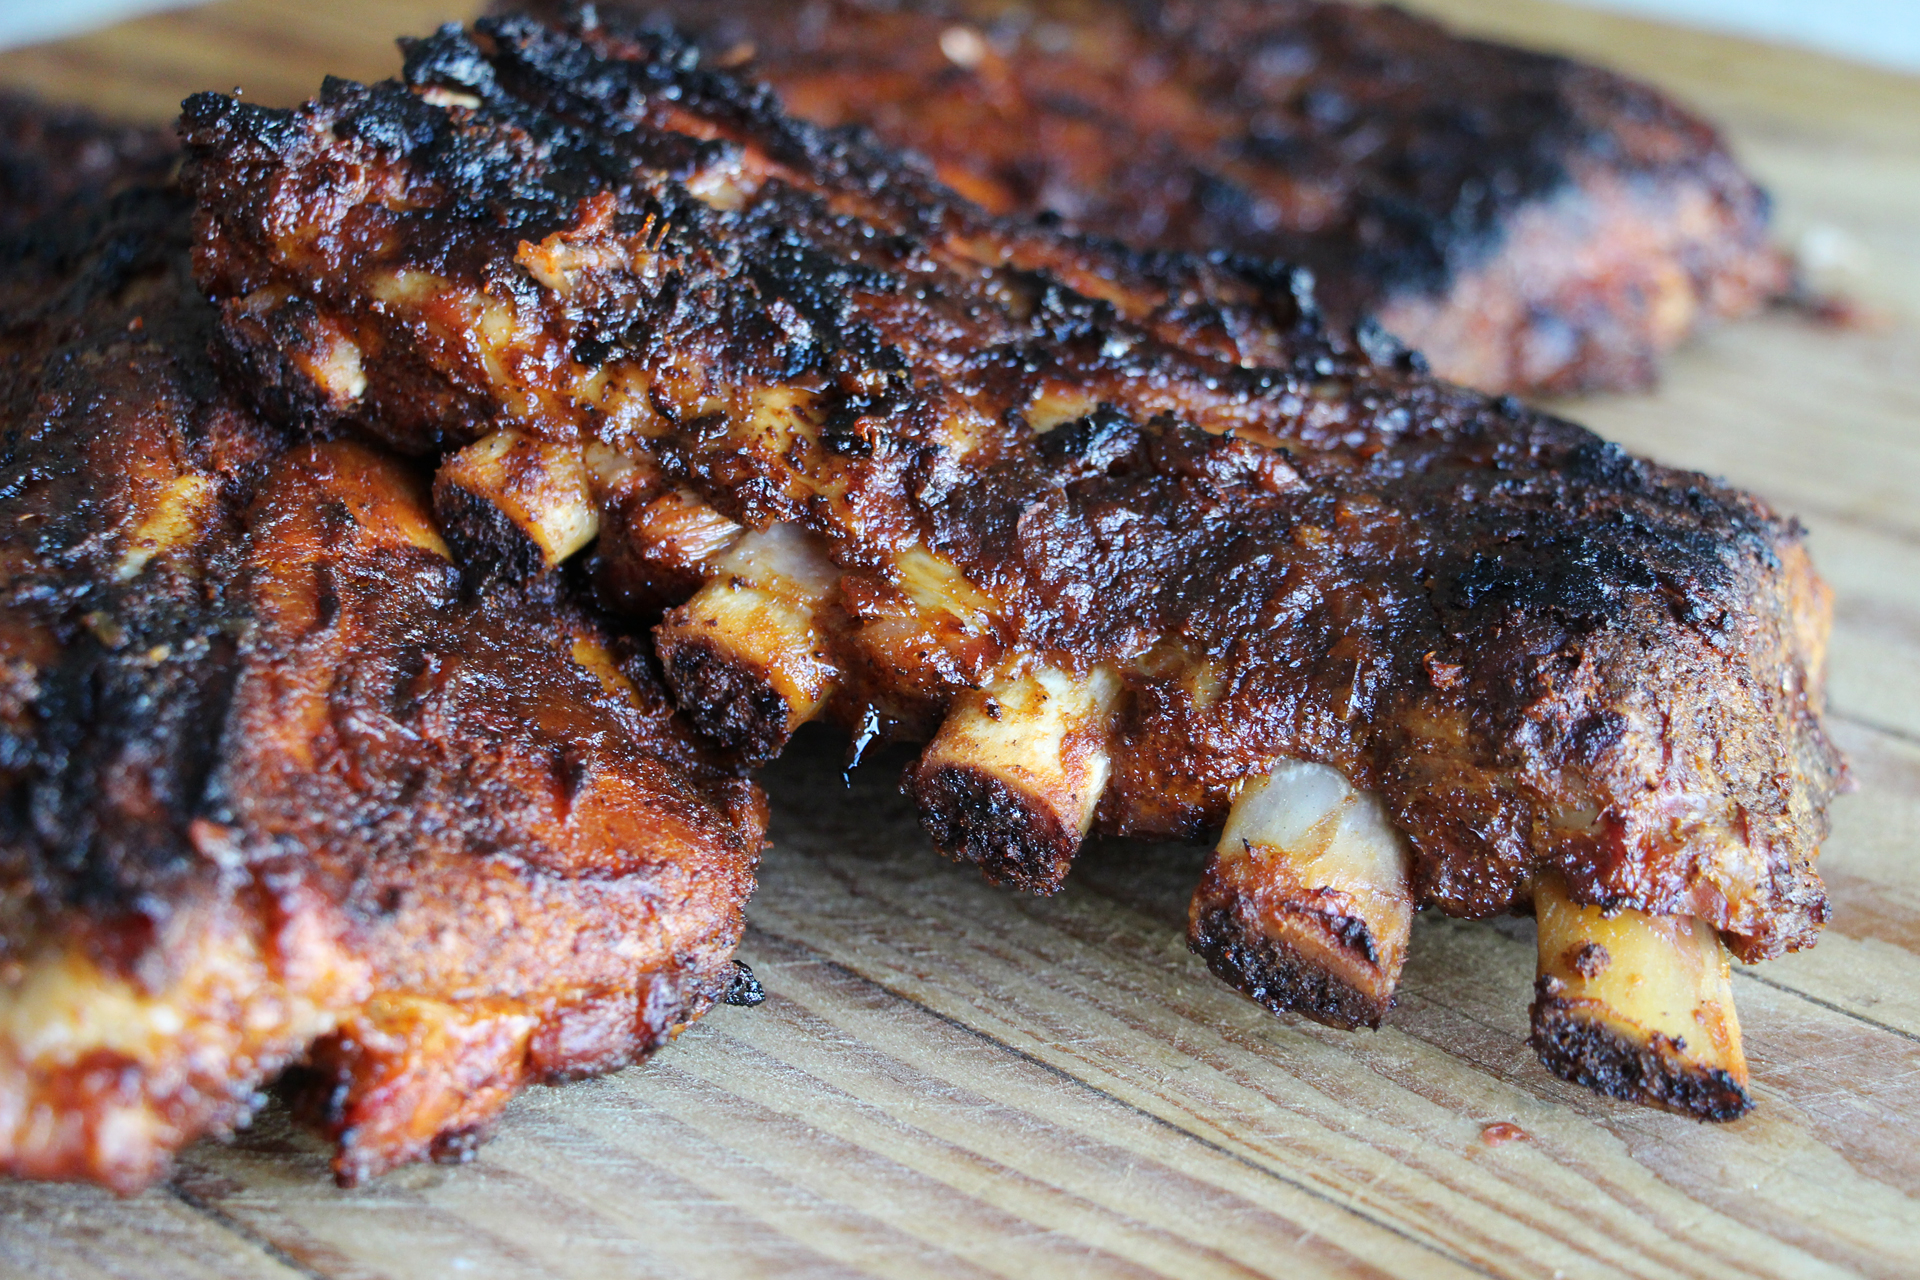 BBQ Baby Back Ribs with Homemade Barbecue Sauce